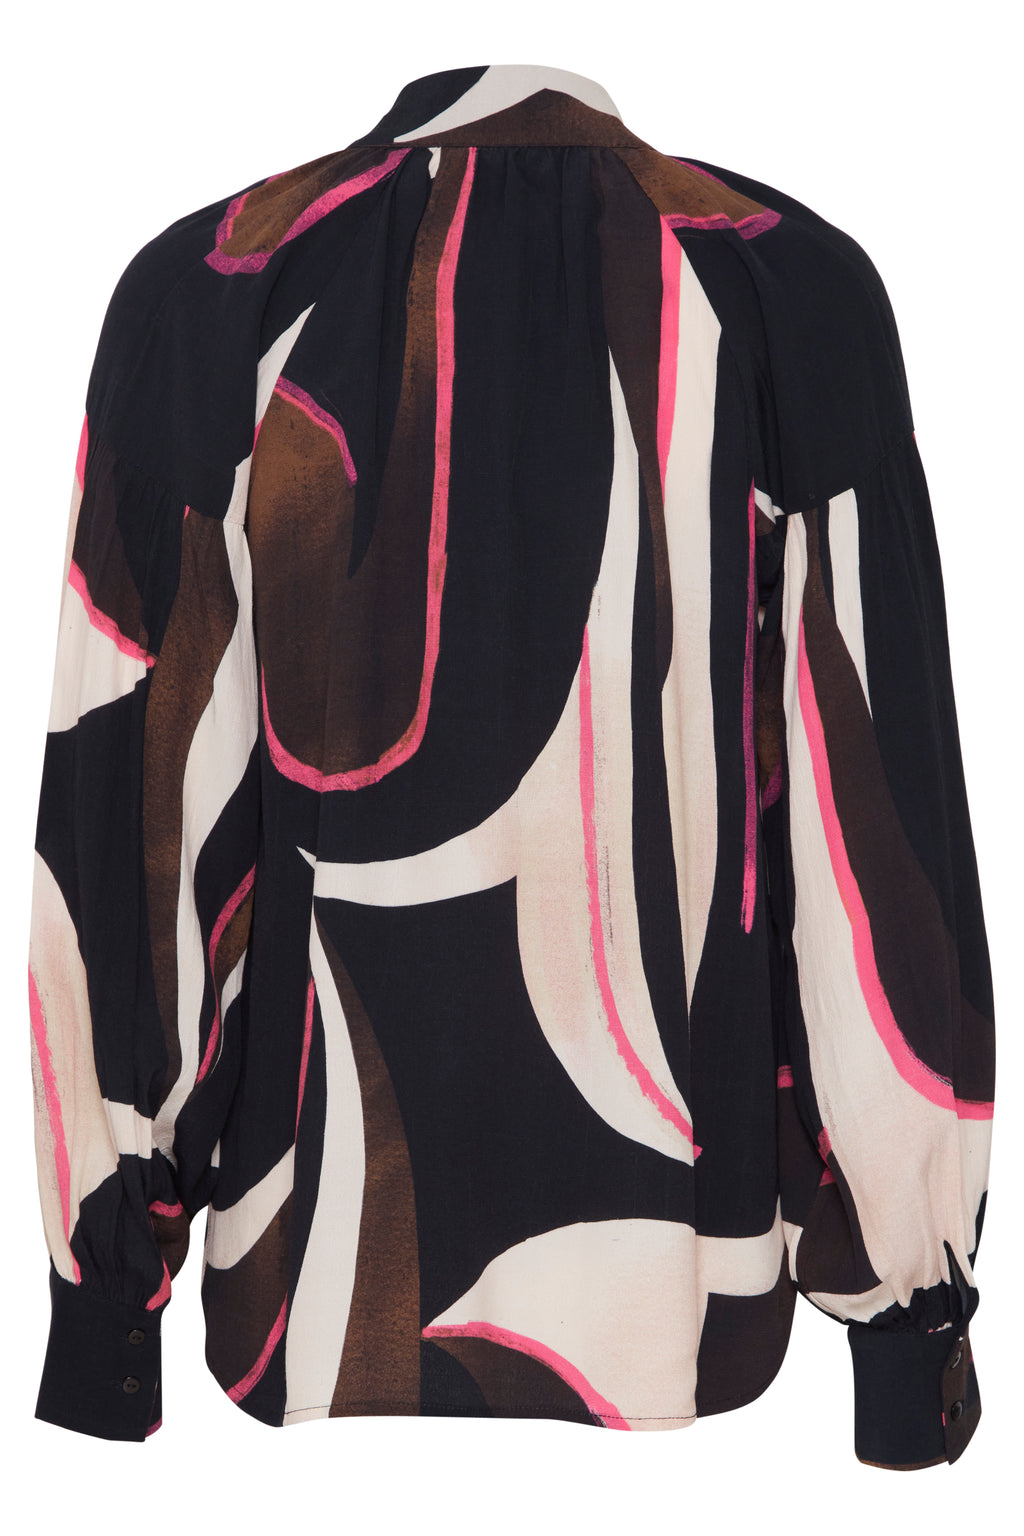 Fransa Frlena – Abstract 20613285 Blazer/Pink Boutique Blouse, 67 Printed Ruby Navy